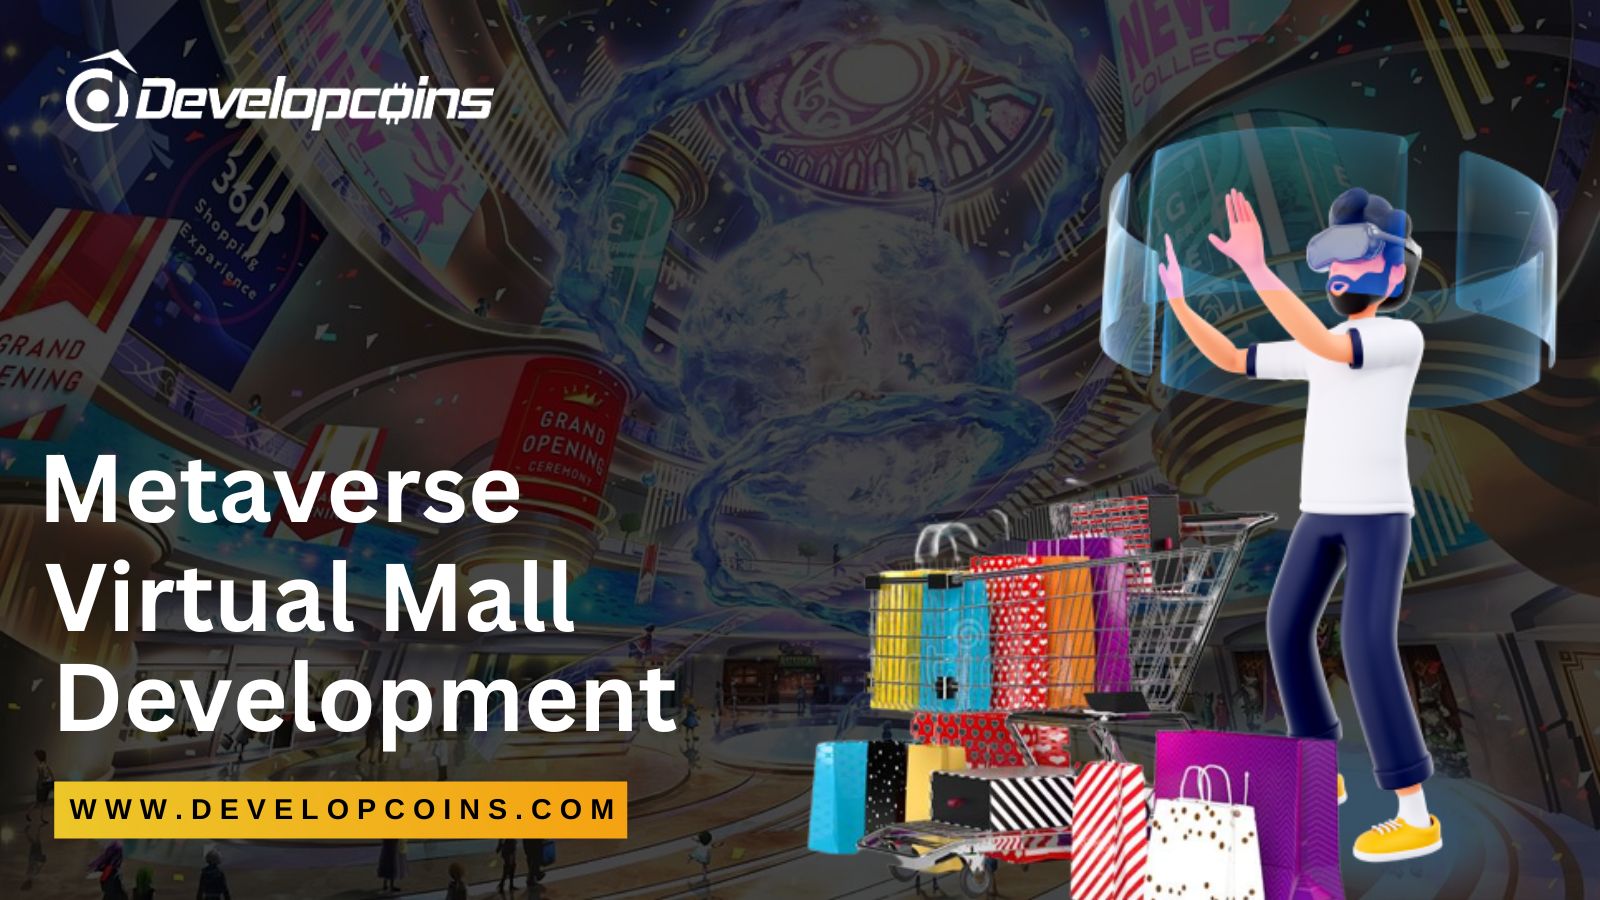 Metaverse Virtual Mall Development: The Solution for Brick-and-Mortar Retail Shopping Challenges